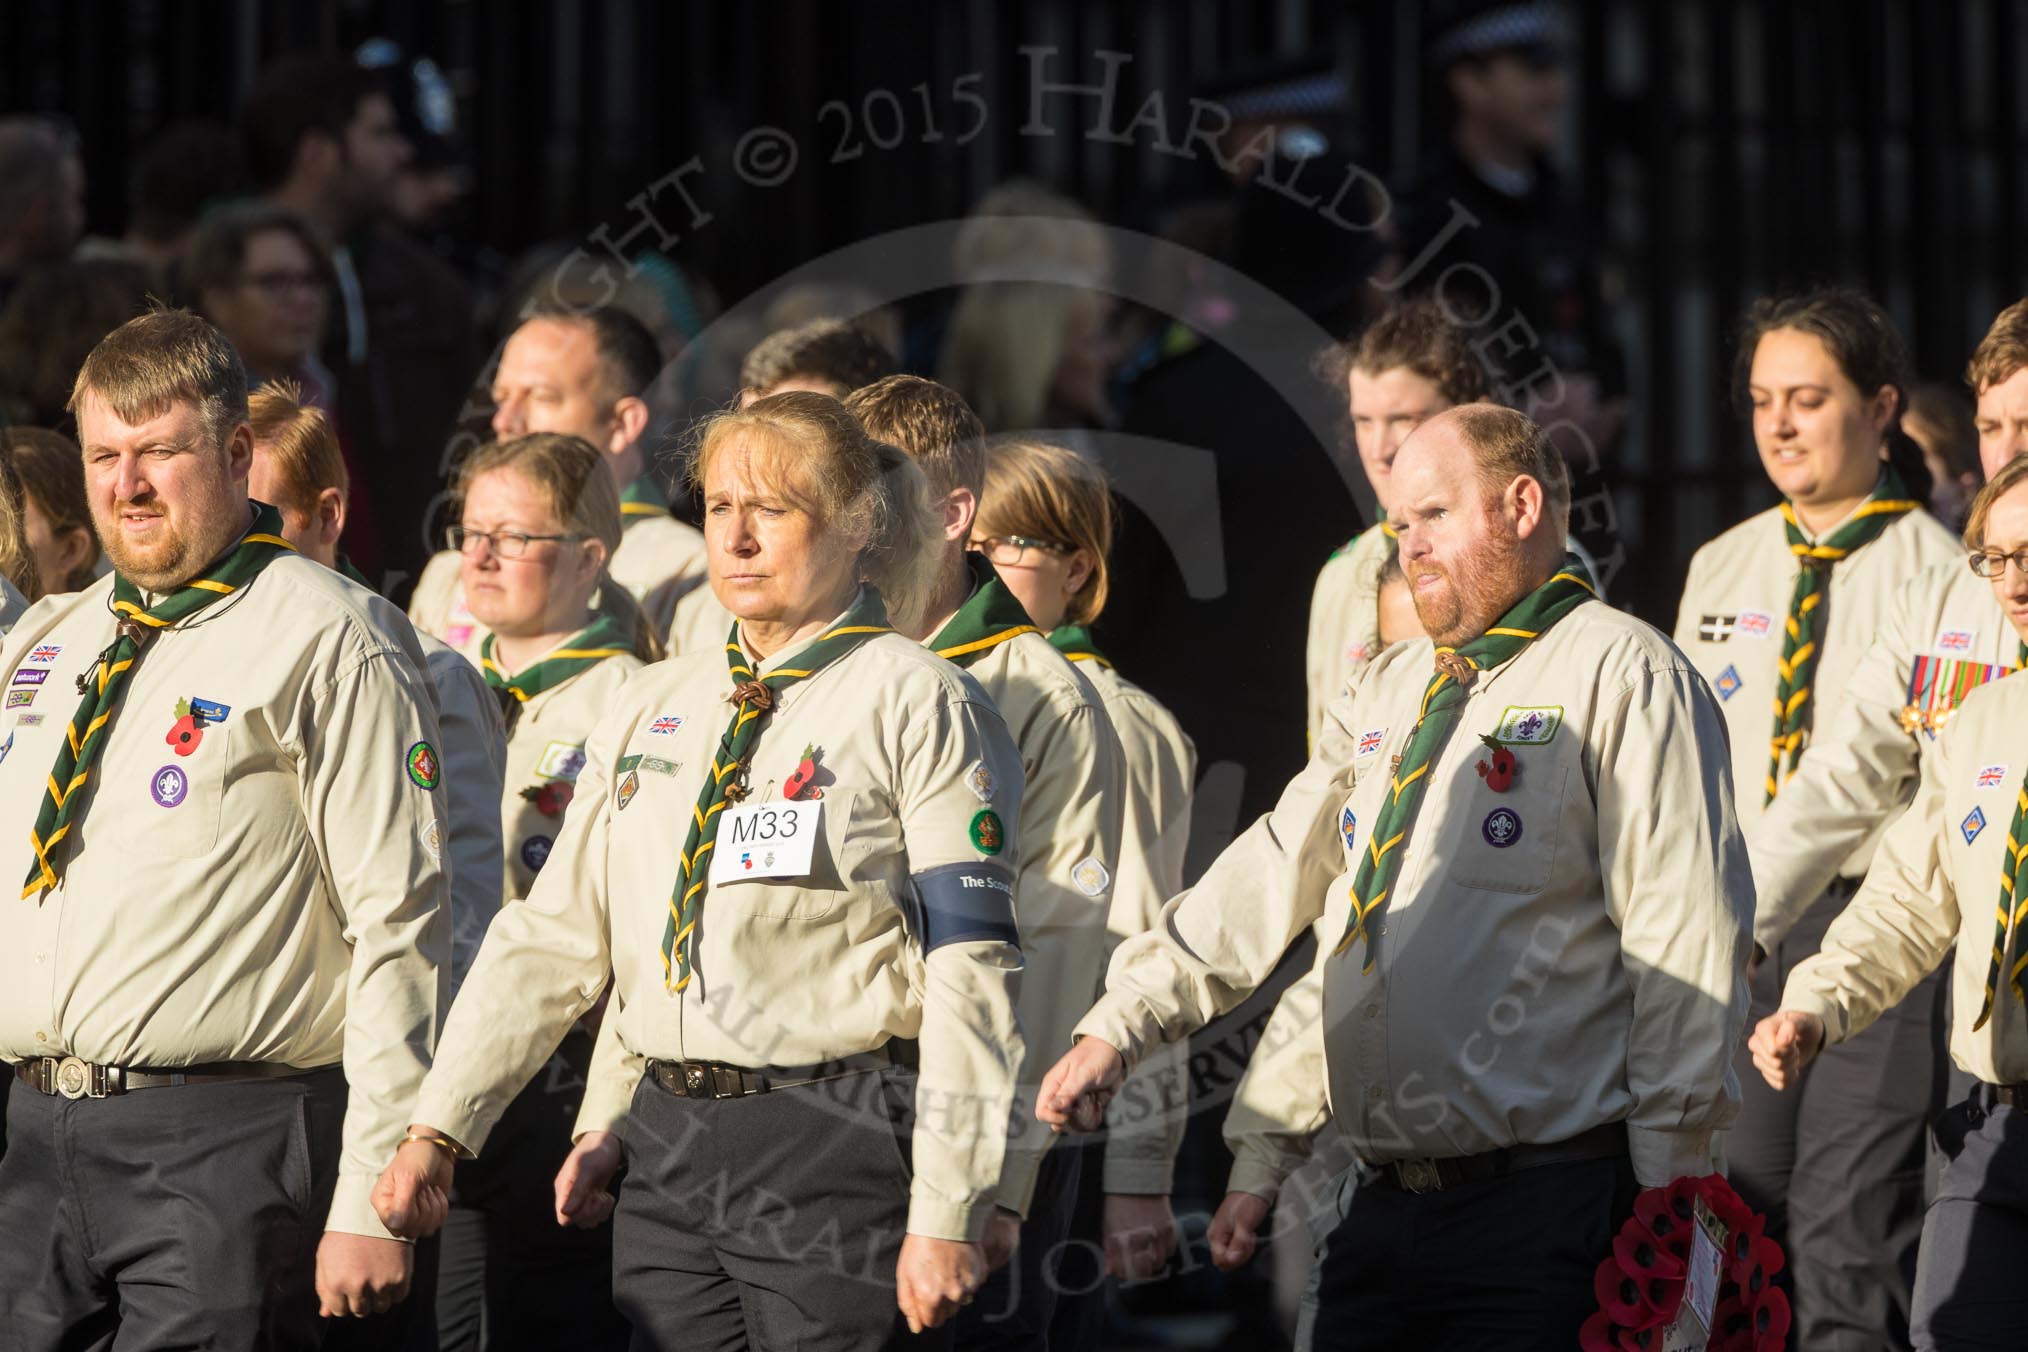 March Past, Remembrance Sunday at the Cenotaph 2016: M33 Scout Association.
Cenotaph, Whitehall, London SW1,
London,
Greater London,
United Kingdom,
on 13 November 2016 at 13:18, image #2846